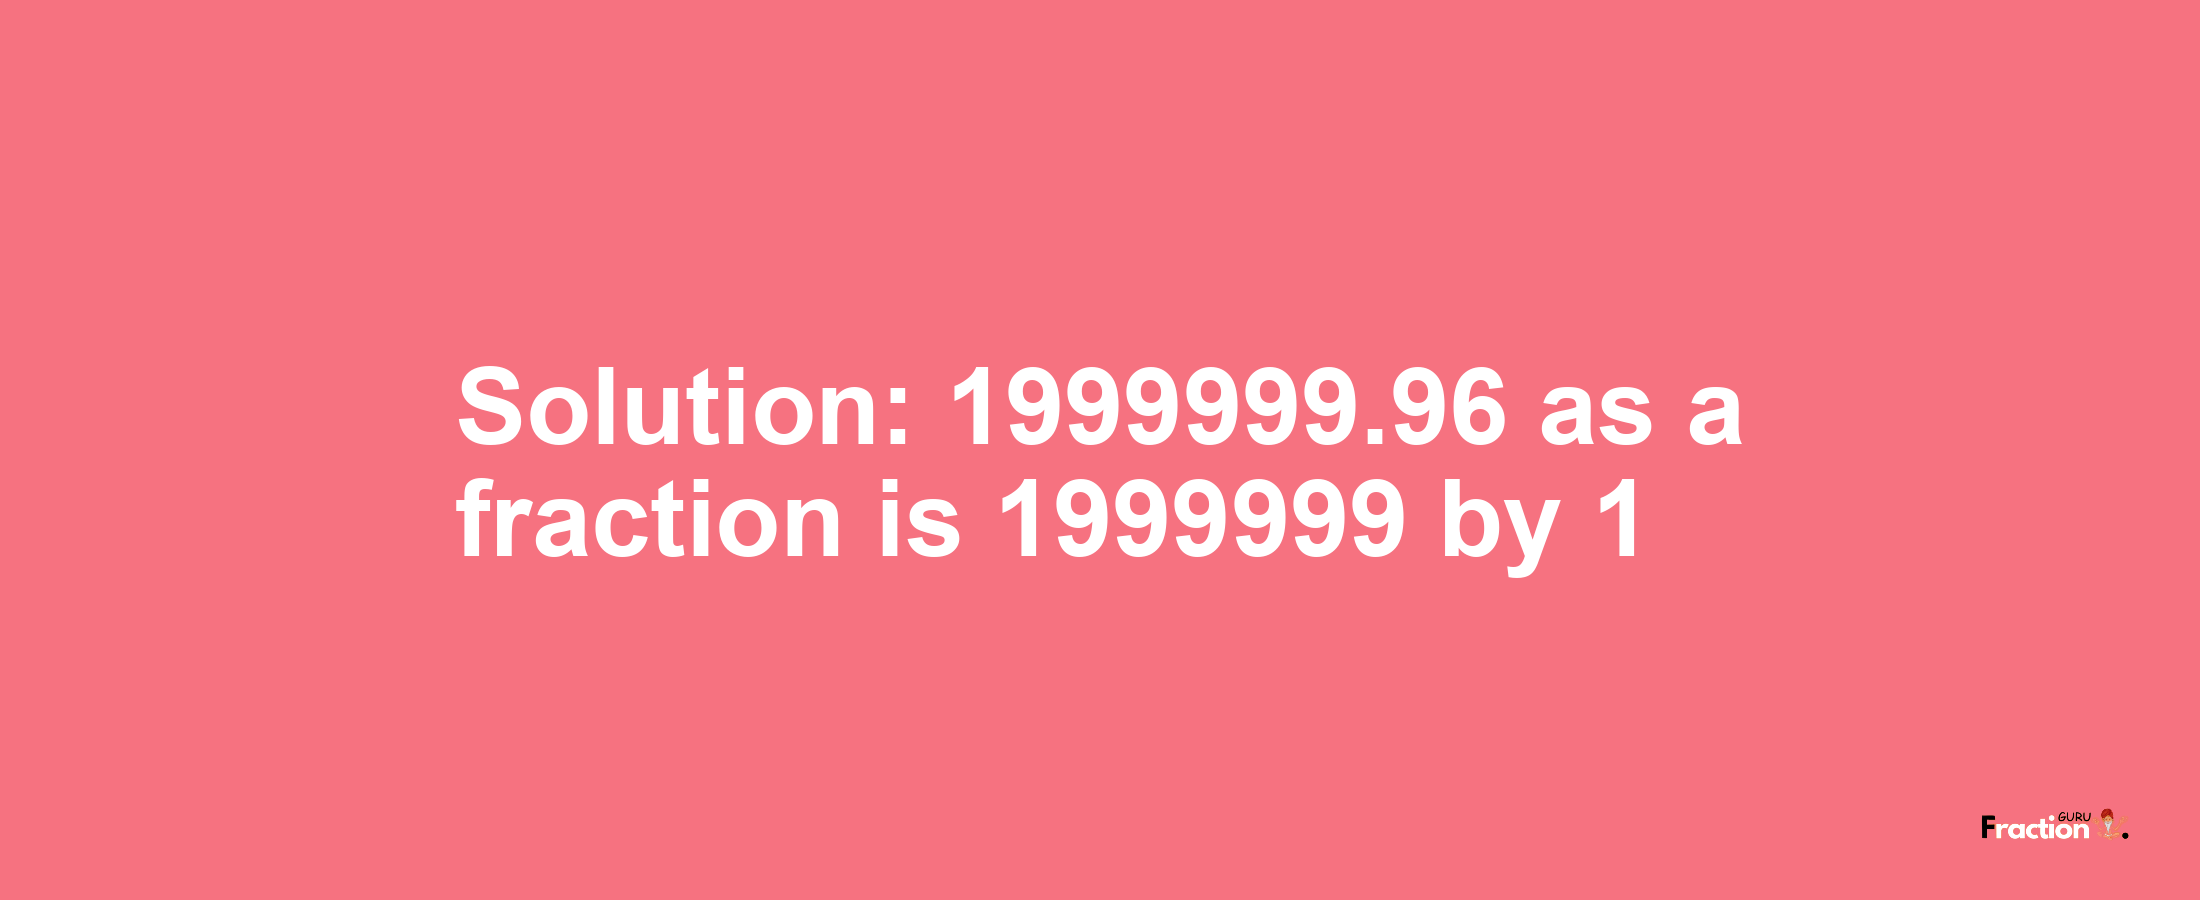 Solution:1999999.96 as a fraction is 1999999/1